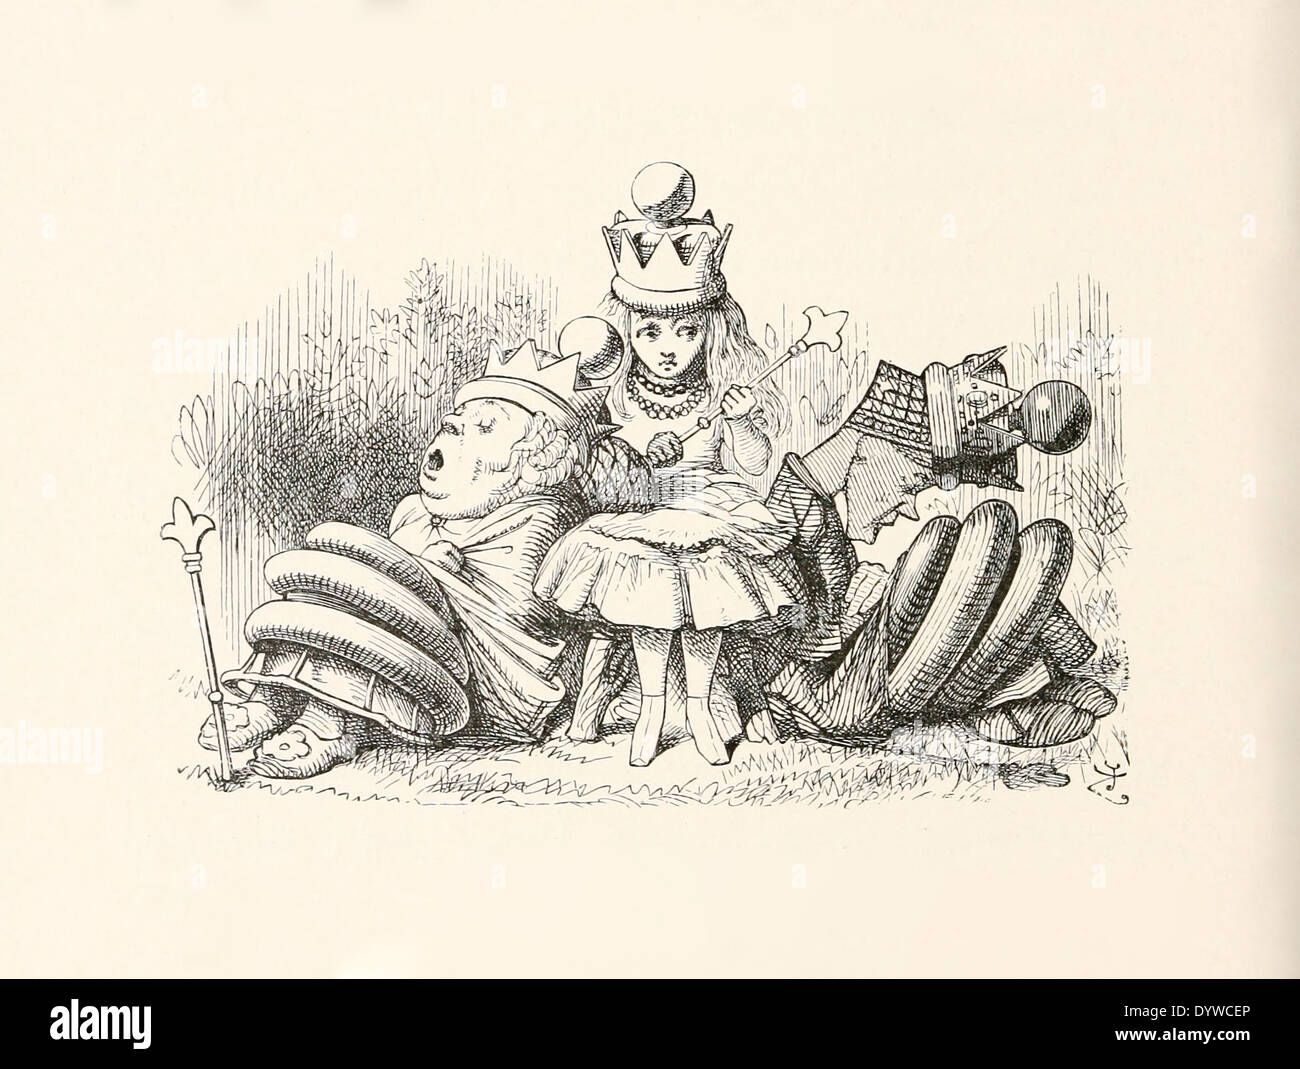 The Pig Baby, from the Lewis Carroll Story Alice in Wonderland,  Illustration by Sir John Tenniel 1871 Stock Photo - Alamy